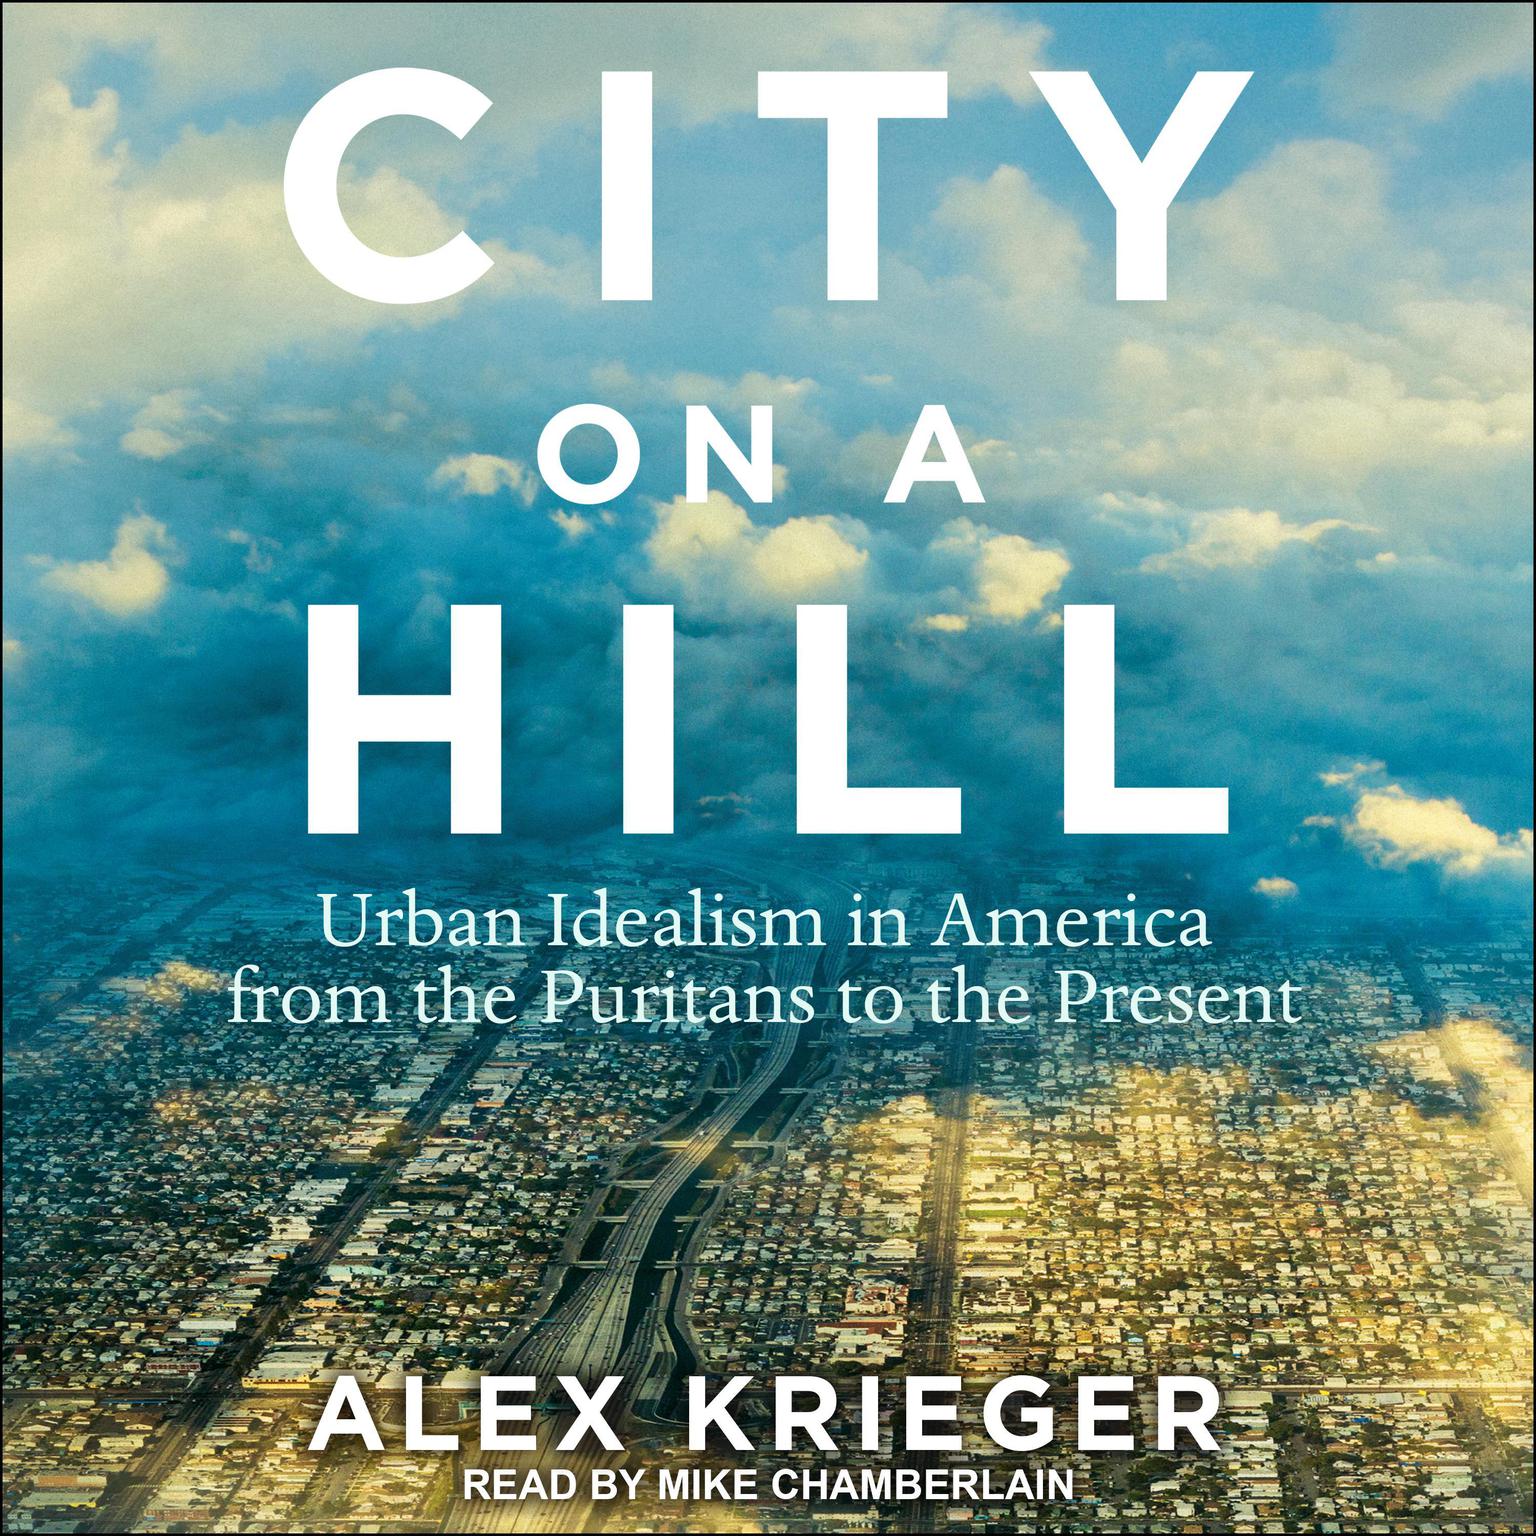 City on a Hill: Urban Idealism in America from the Puritans to the Present Audiobook, by Alex Krieger